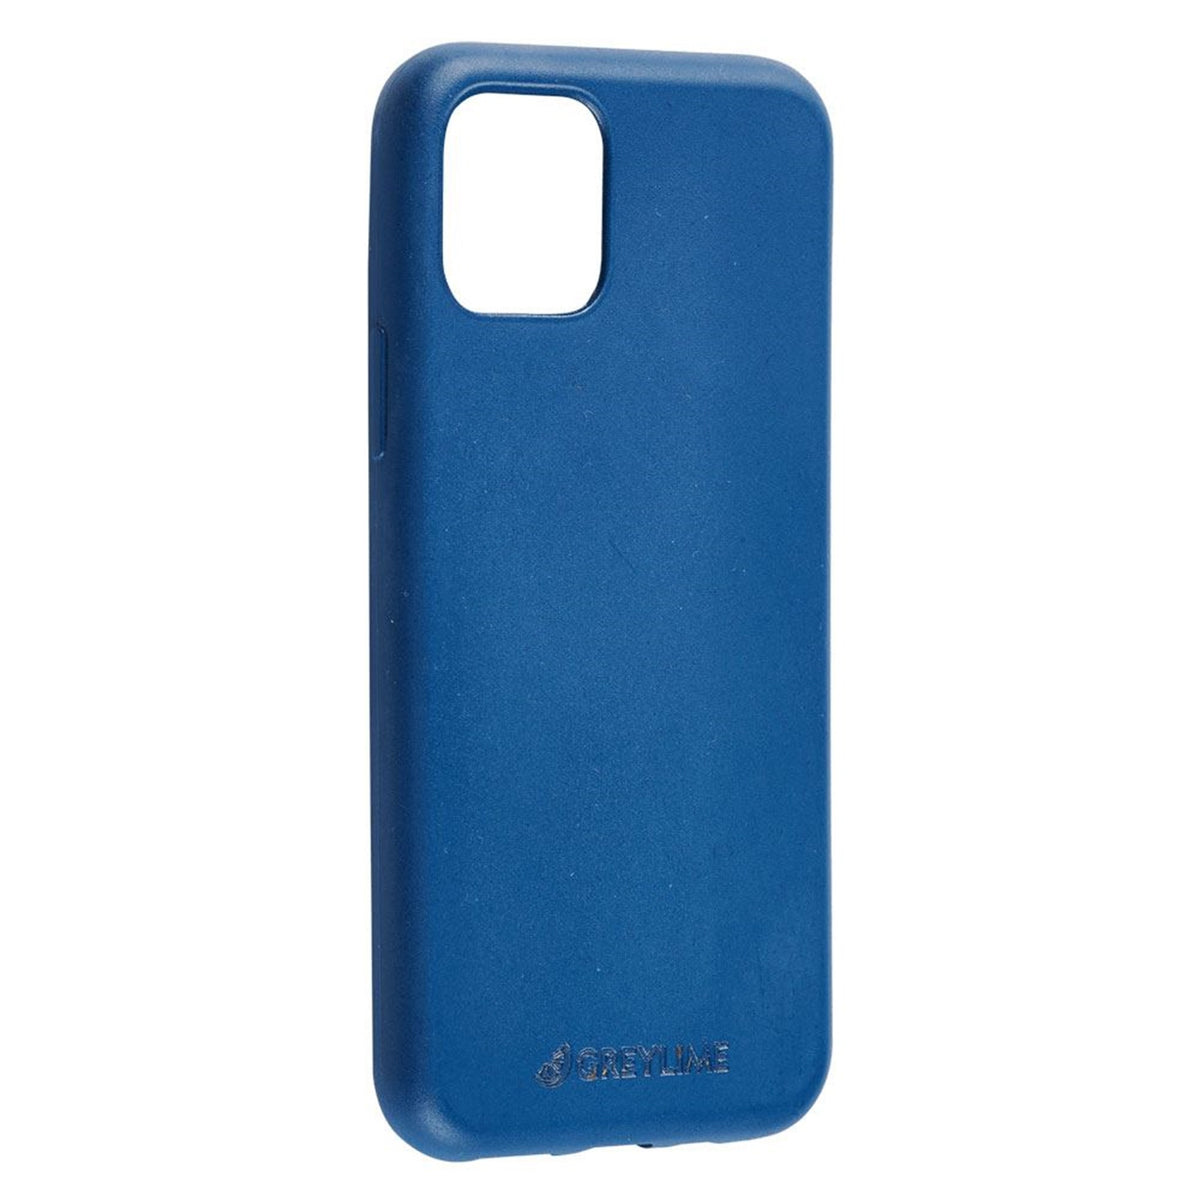 GreyLime-iPhone-11-Pro-Max-biodegradable-cover-Navy-Blue-COIP11PM03-V1.jpg